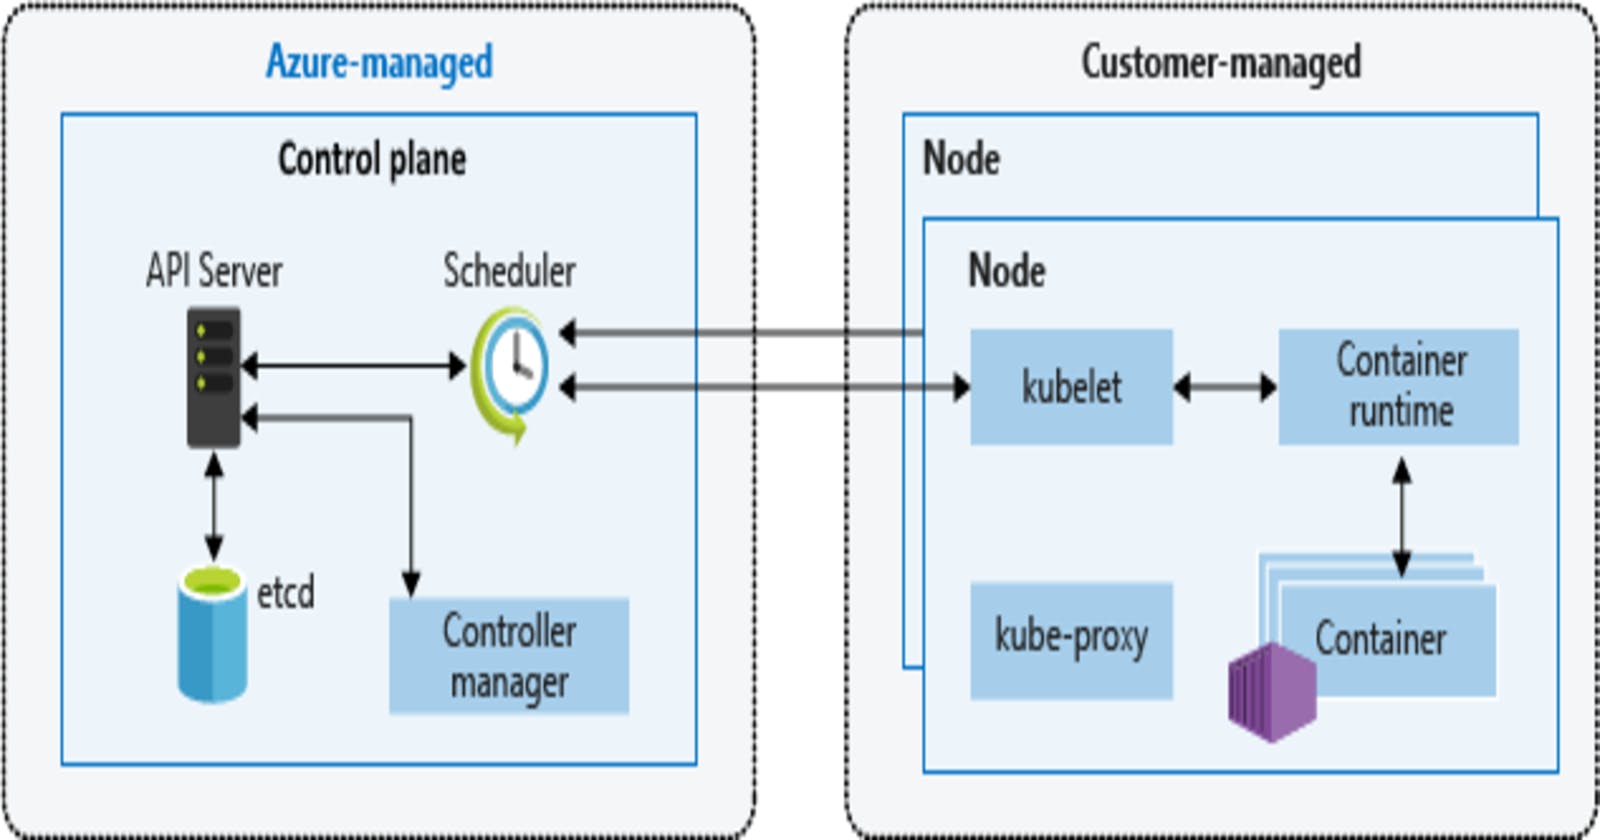 How to Enable and Query Control Plane Logs in AKS with Azure Monitor